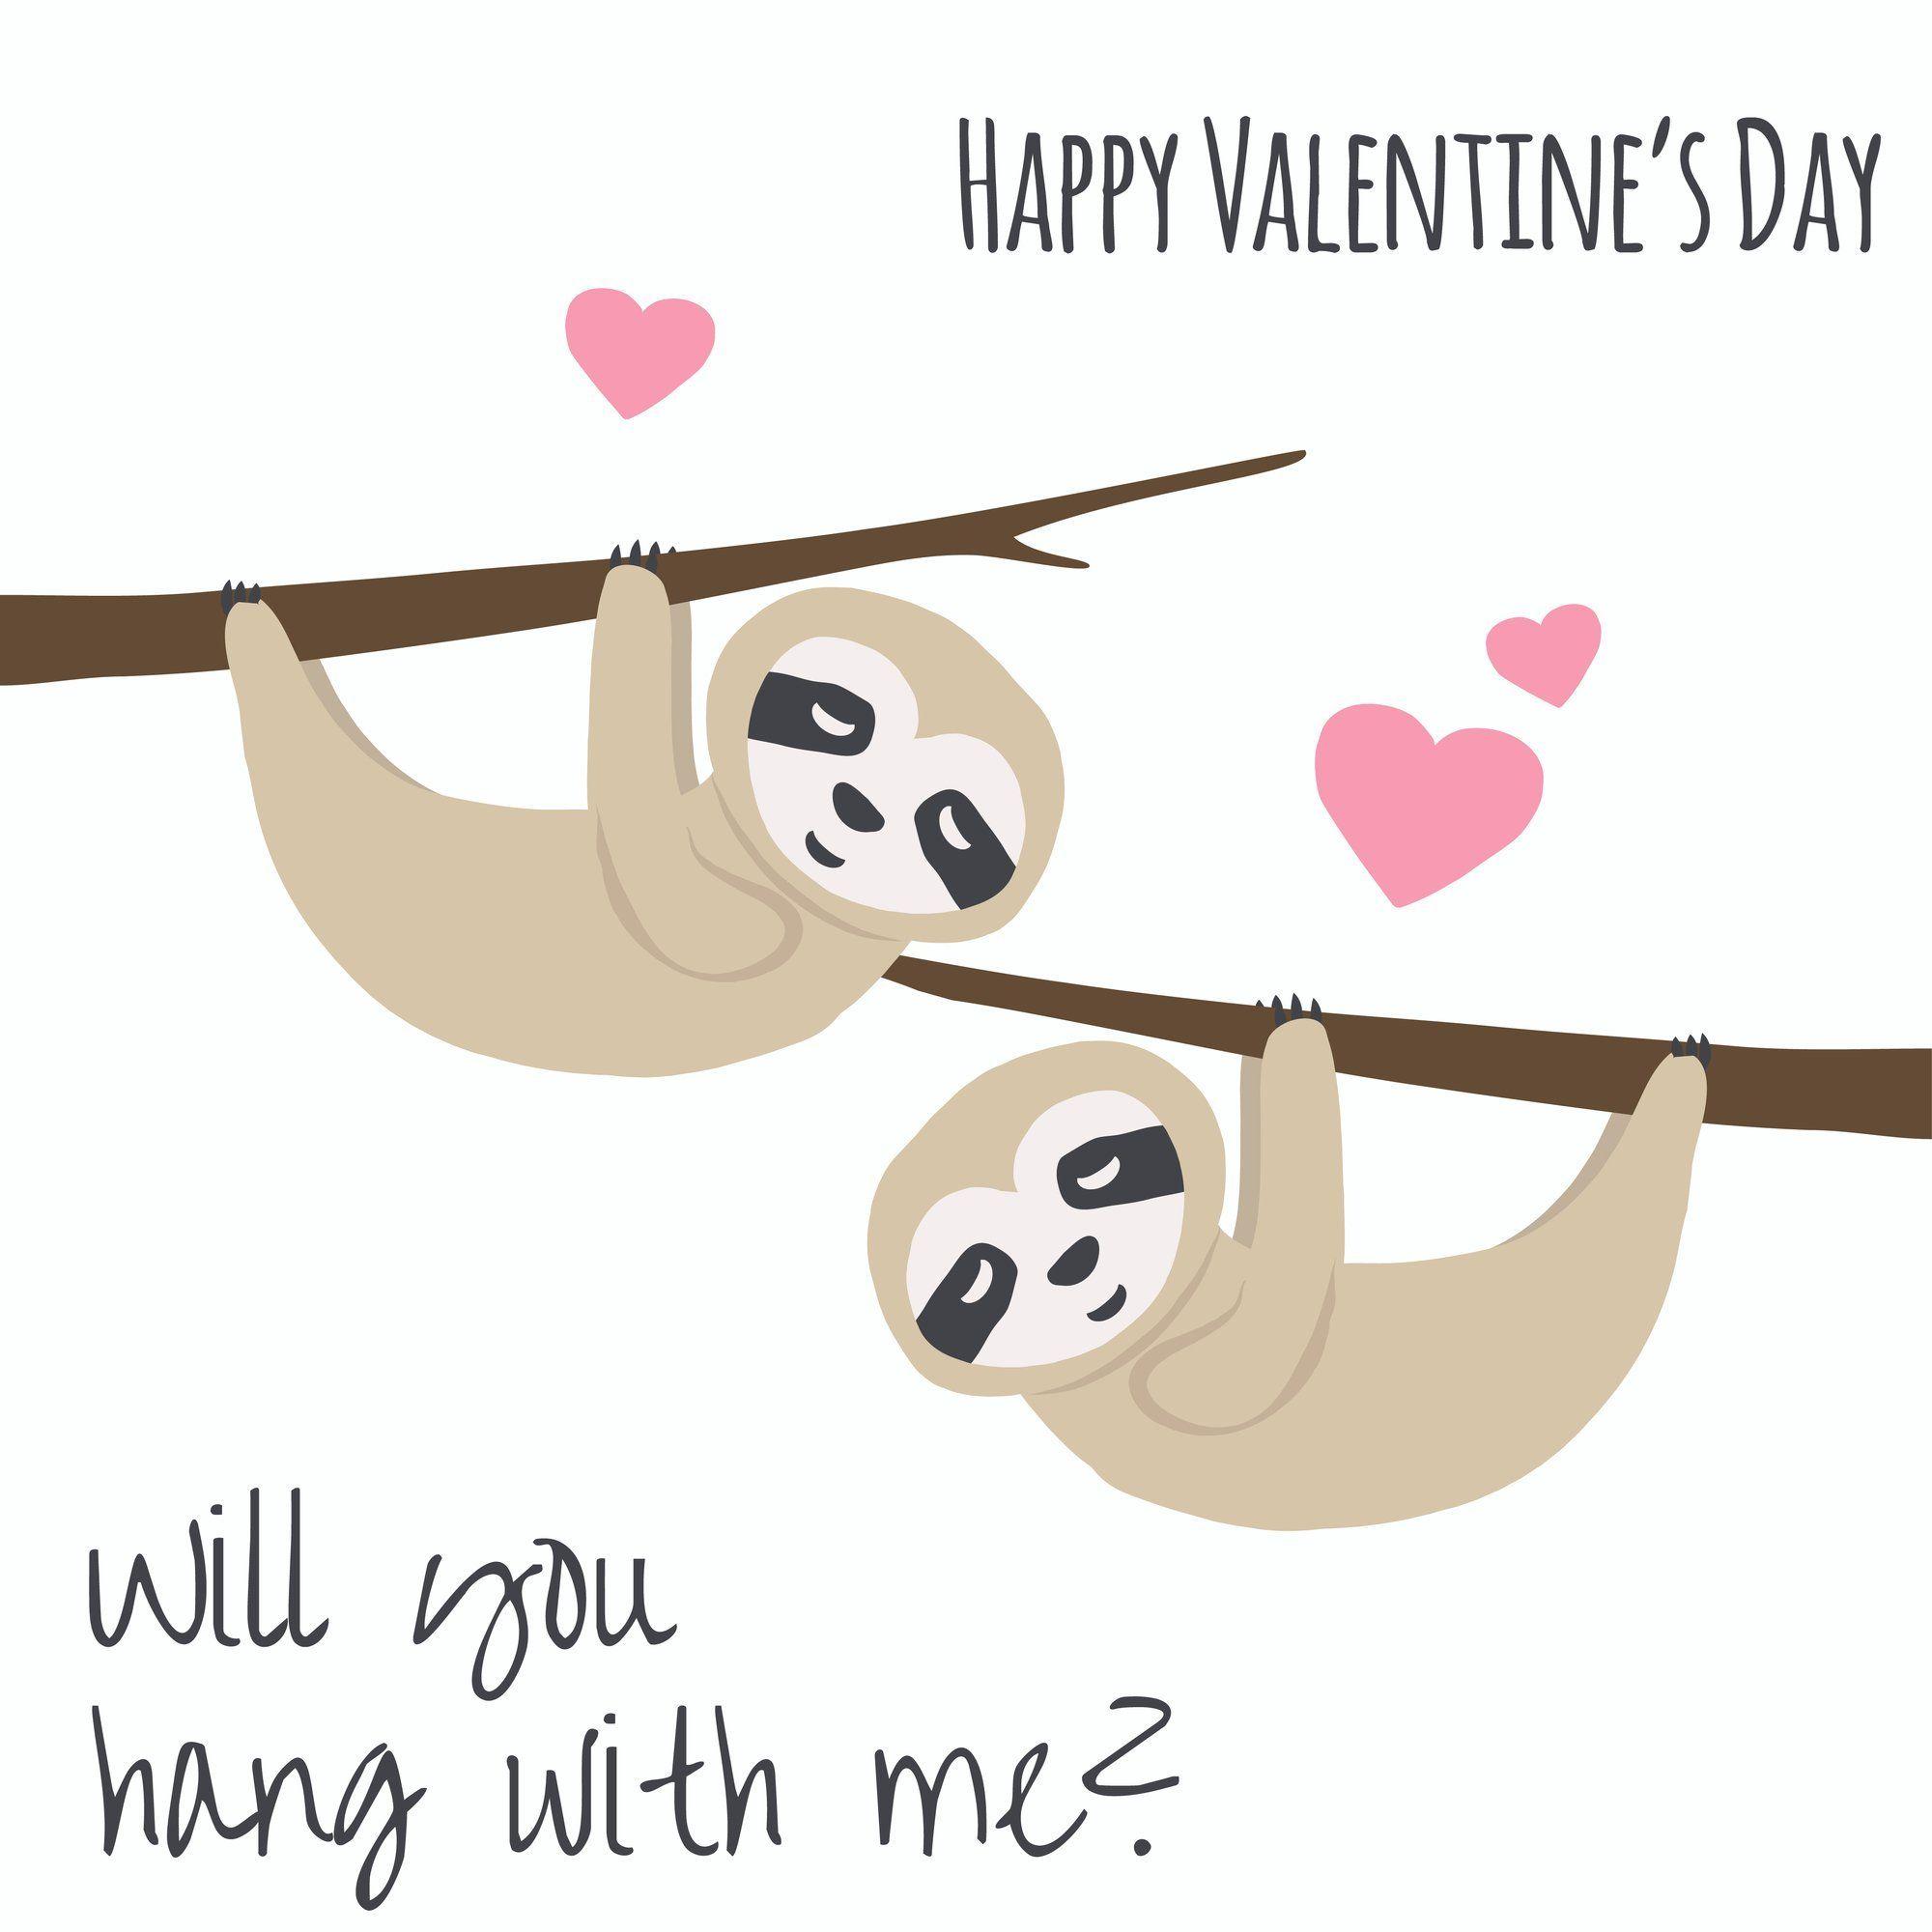 Best Sloth Gifts For Valentine's Day. Valentine gifts